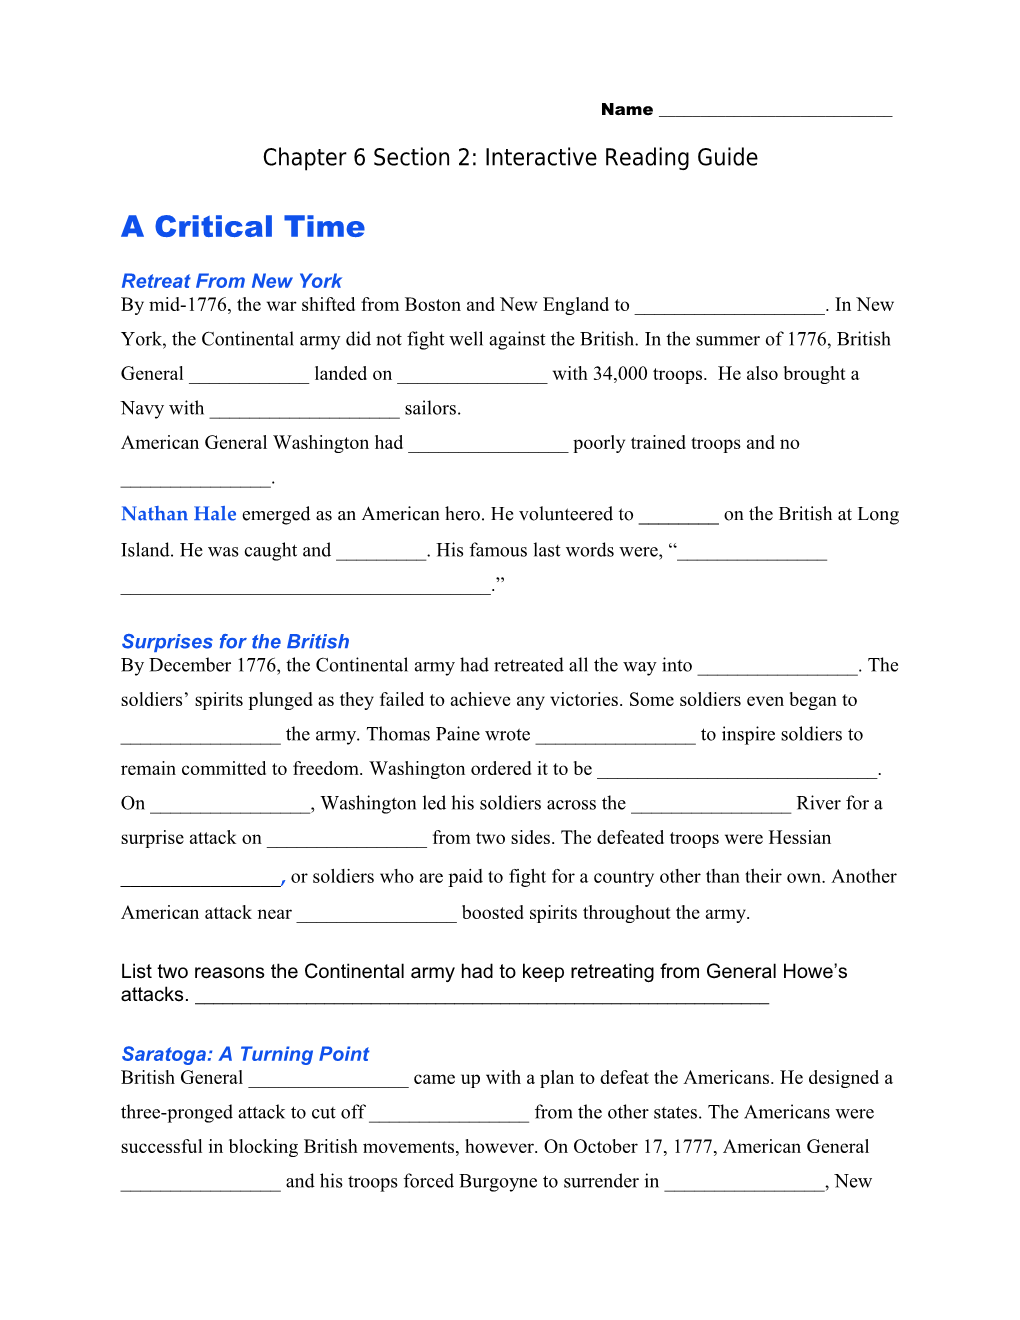 Chapter 6 Section 2: Interactive Reading Guide